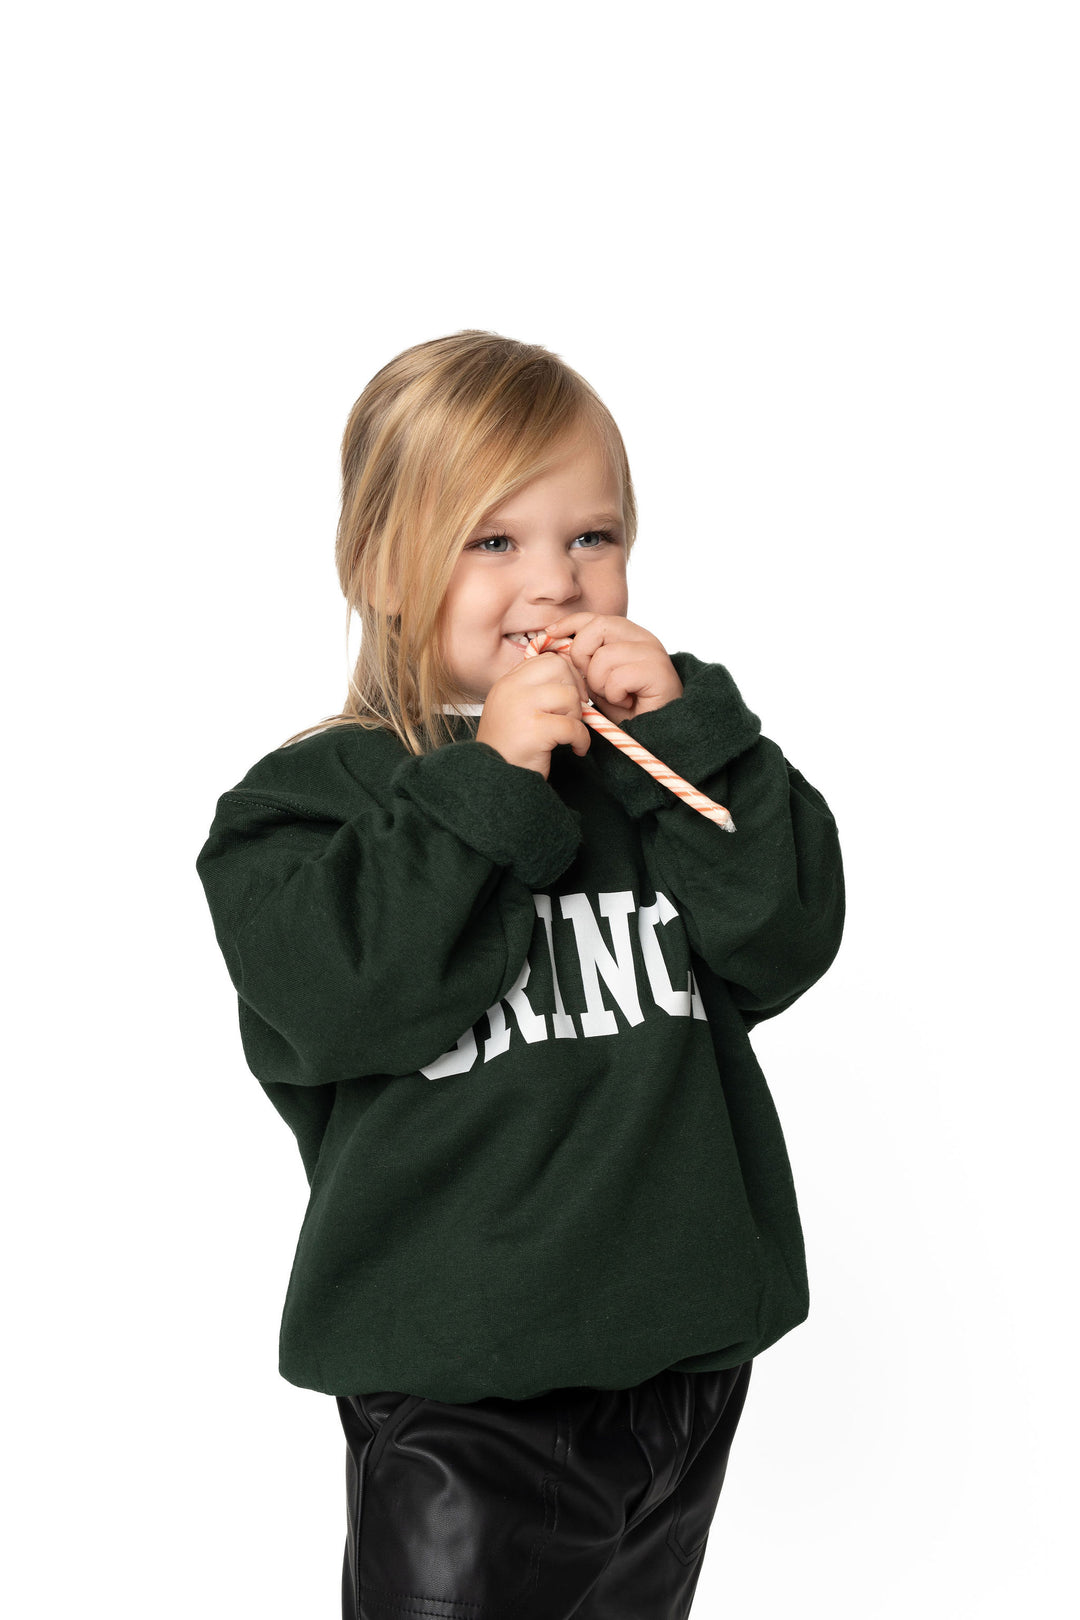 Littles "Mean One"  Oversized Crew